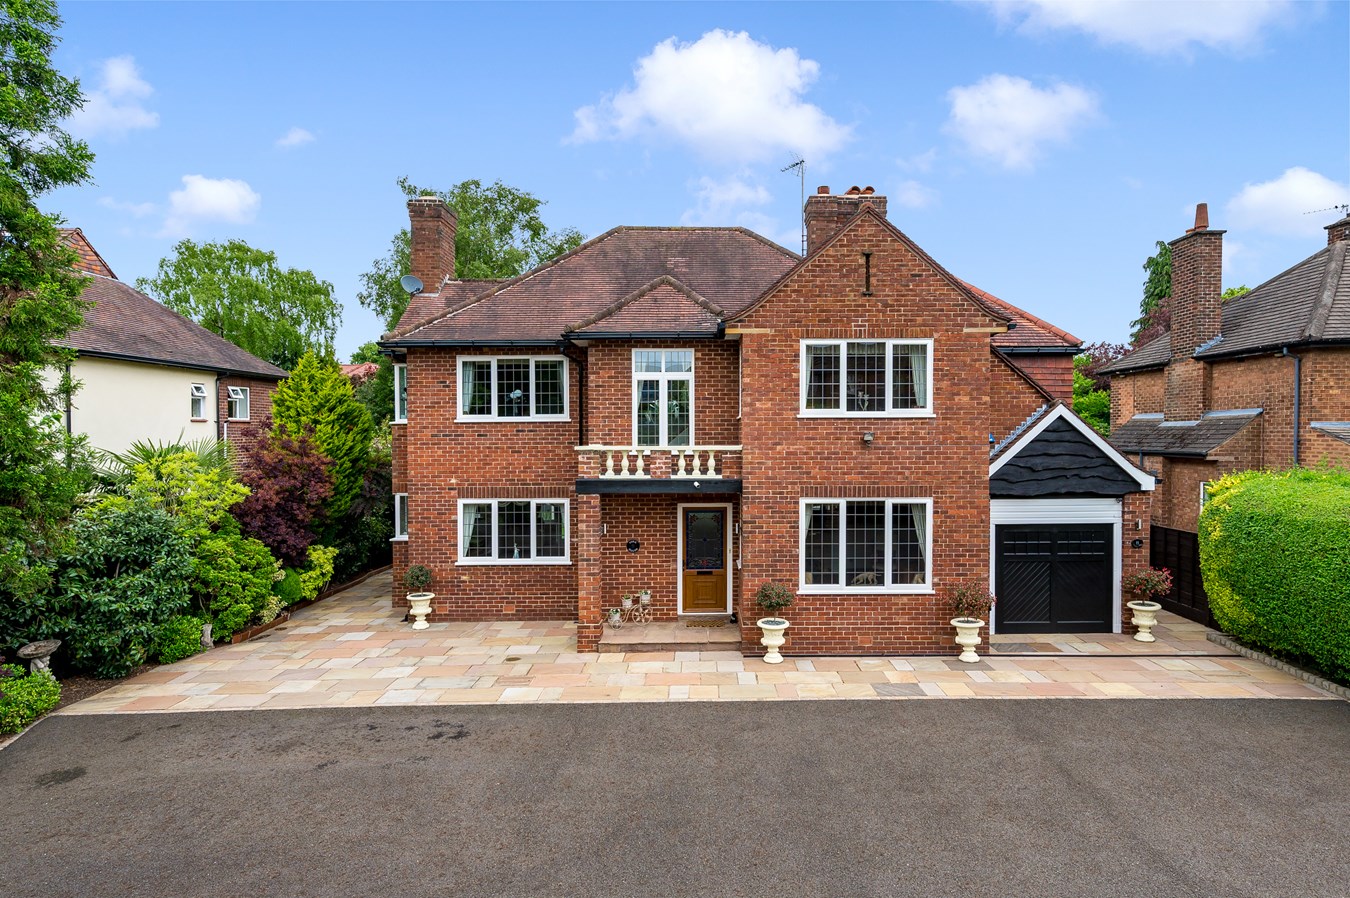 Holly Road North, Wilmslow, SK9